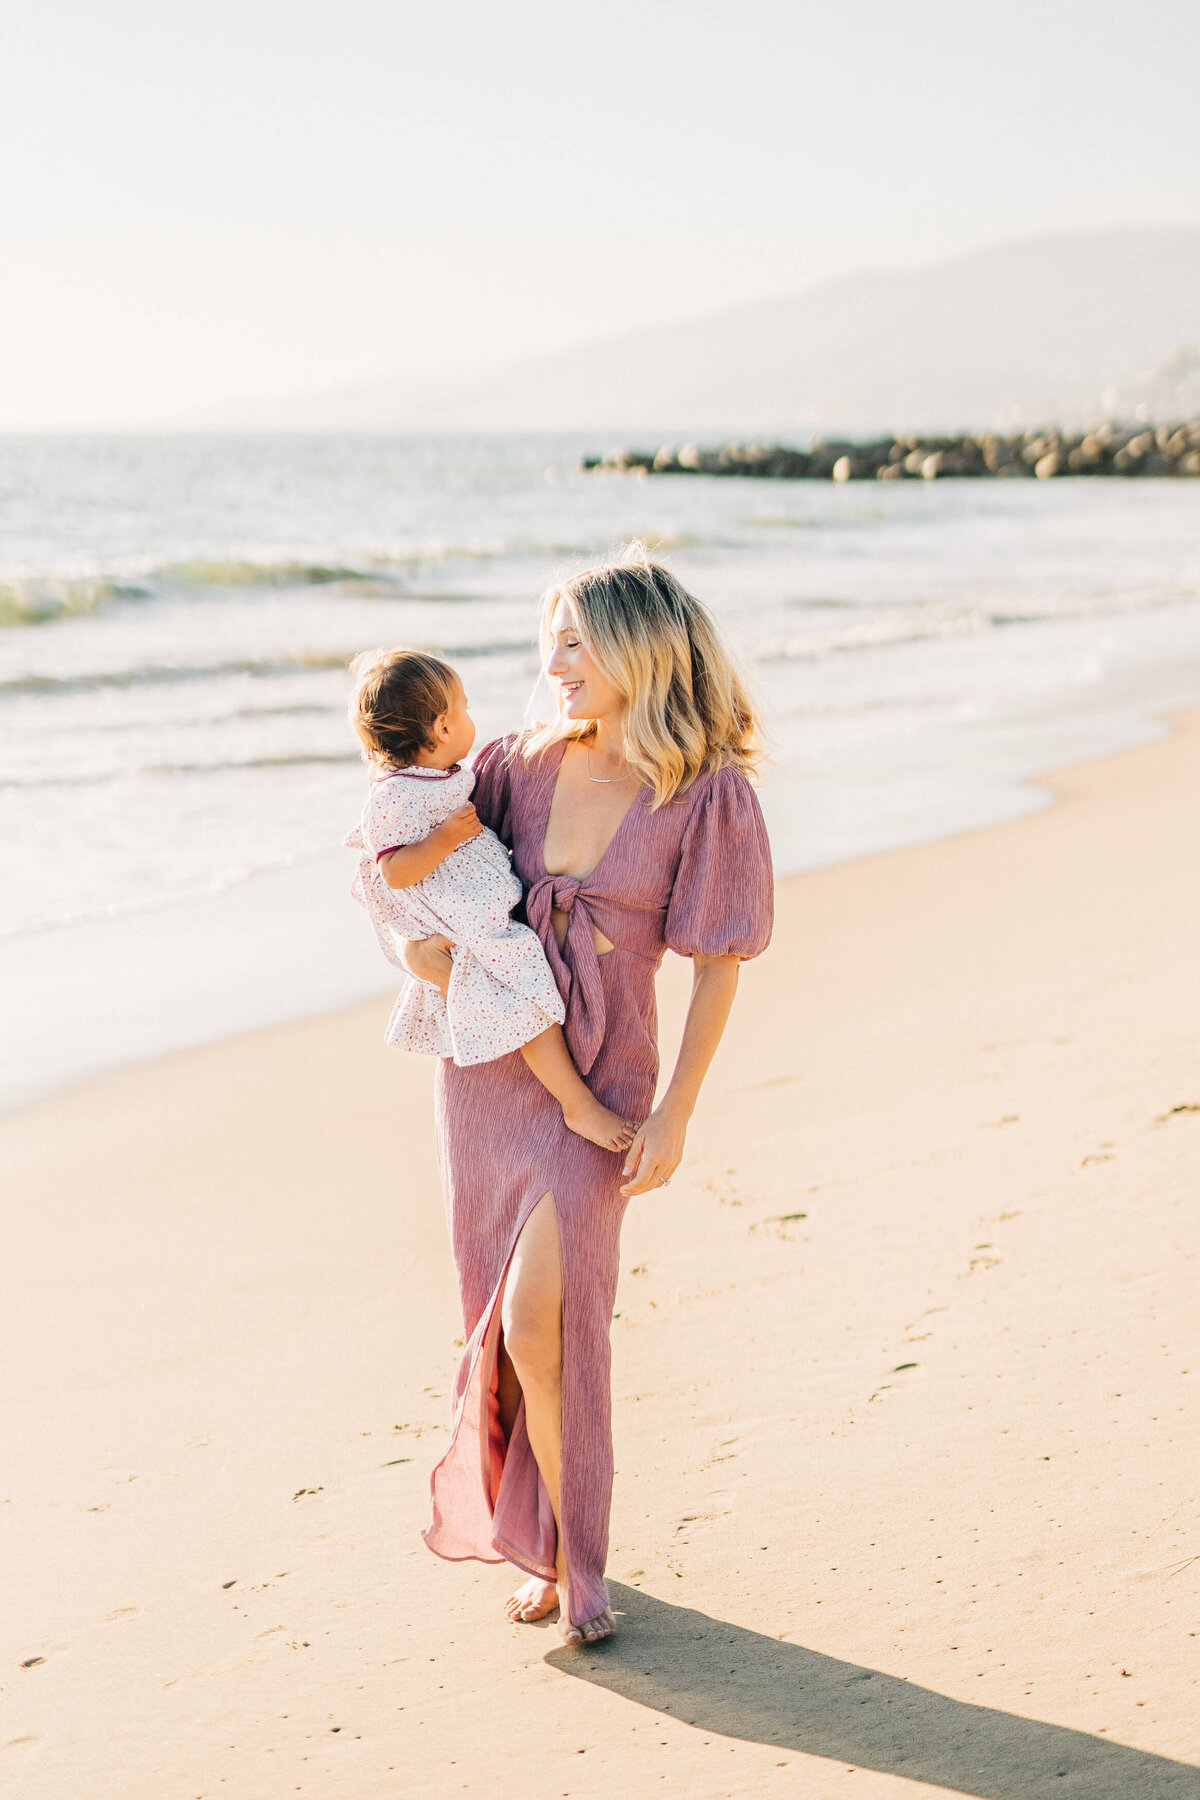 Mom is wearing a purple dress at the beach and holding daughter during their family photography session